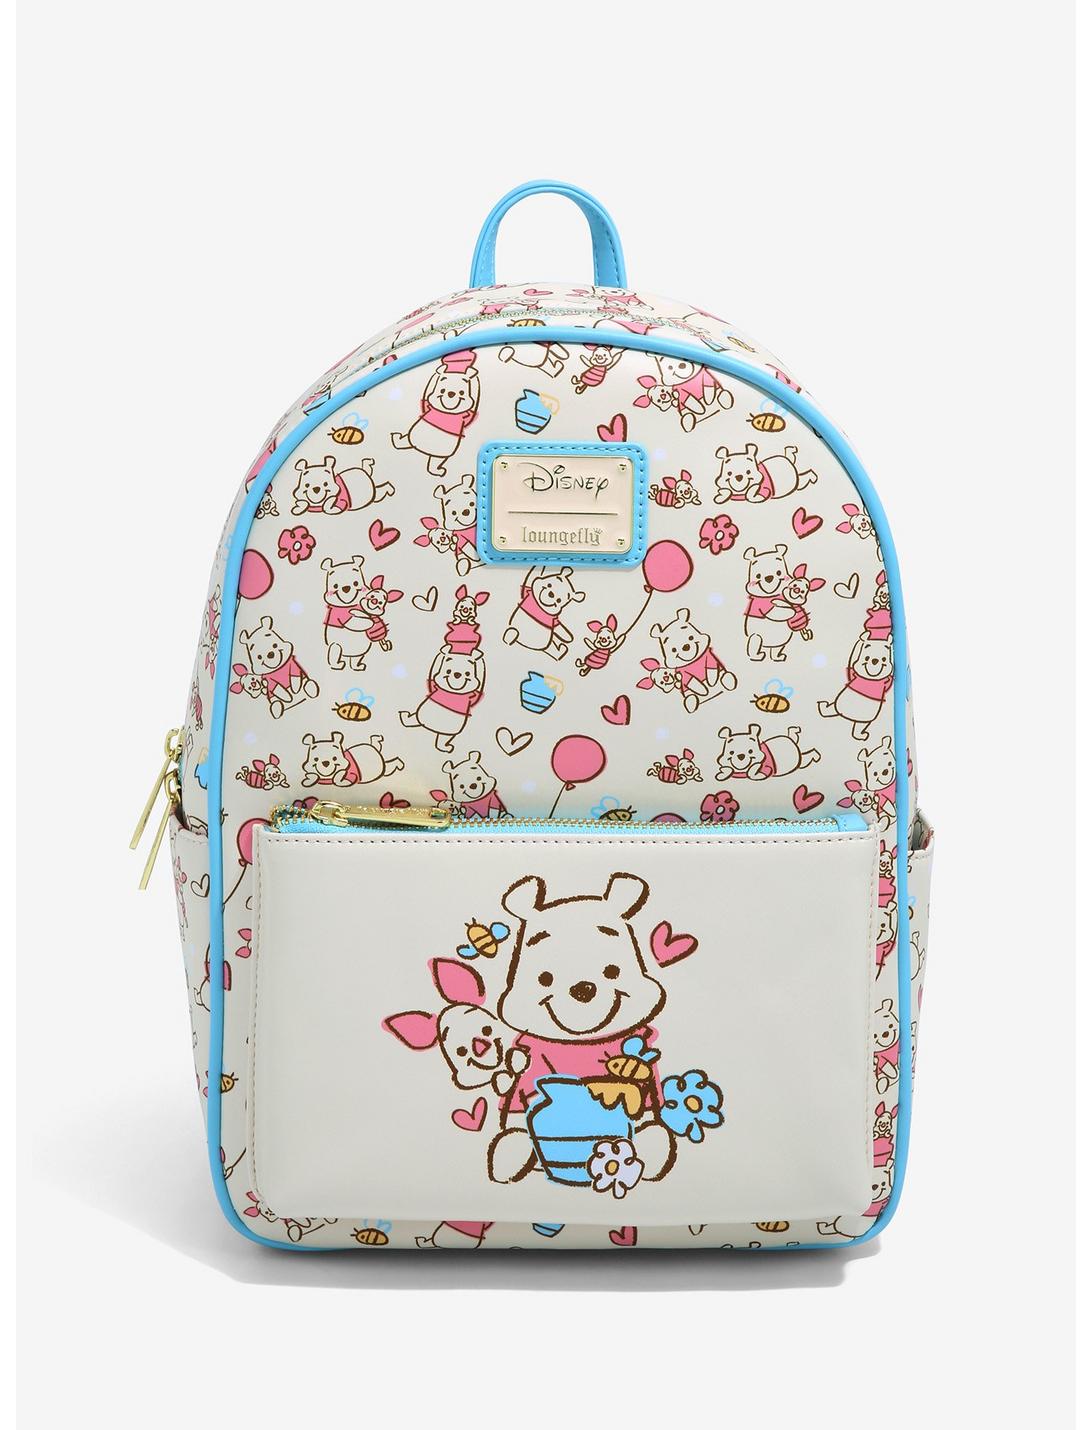 Piglet Loungefly mini backpack